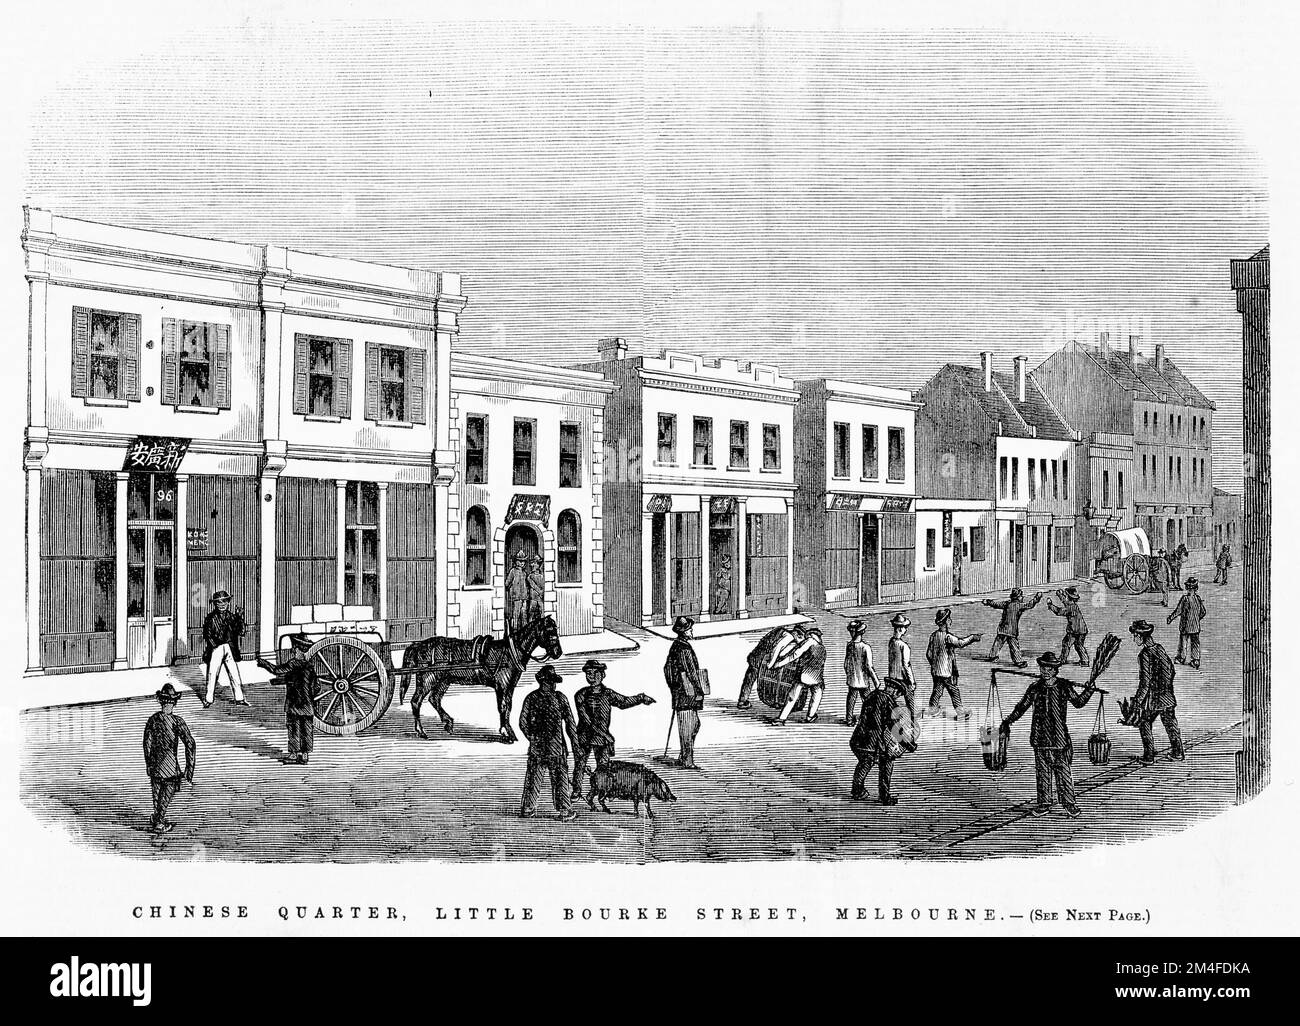 Chinese Quarter, Little Bourke Street, Melbourne in 1863. Stock Photo